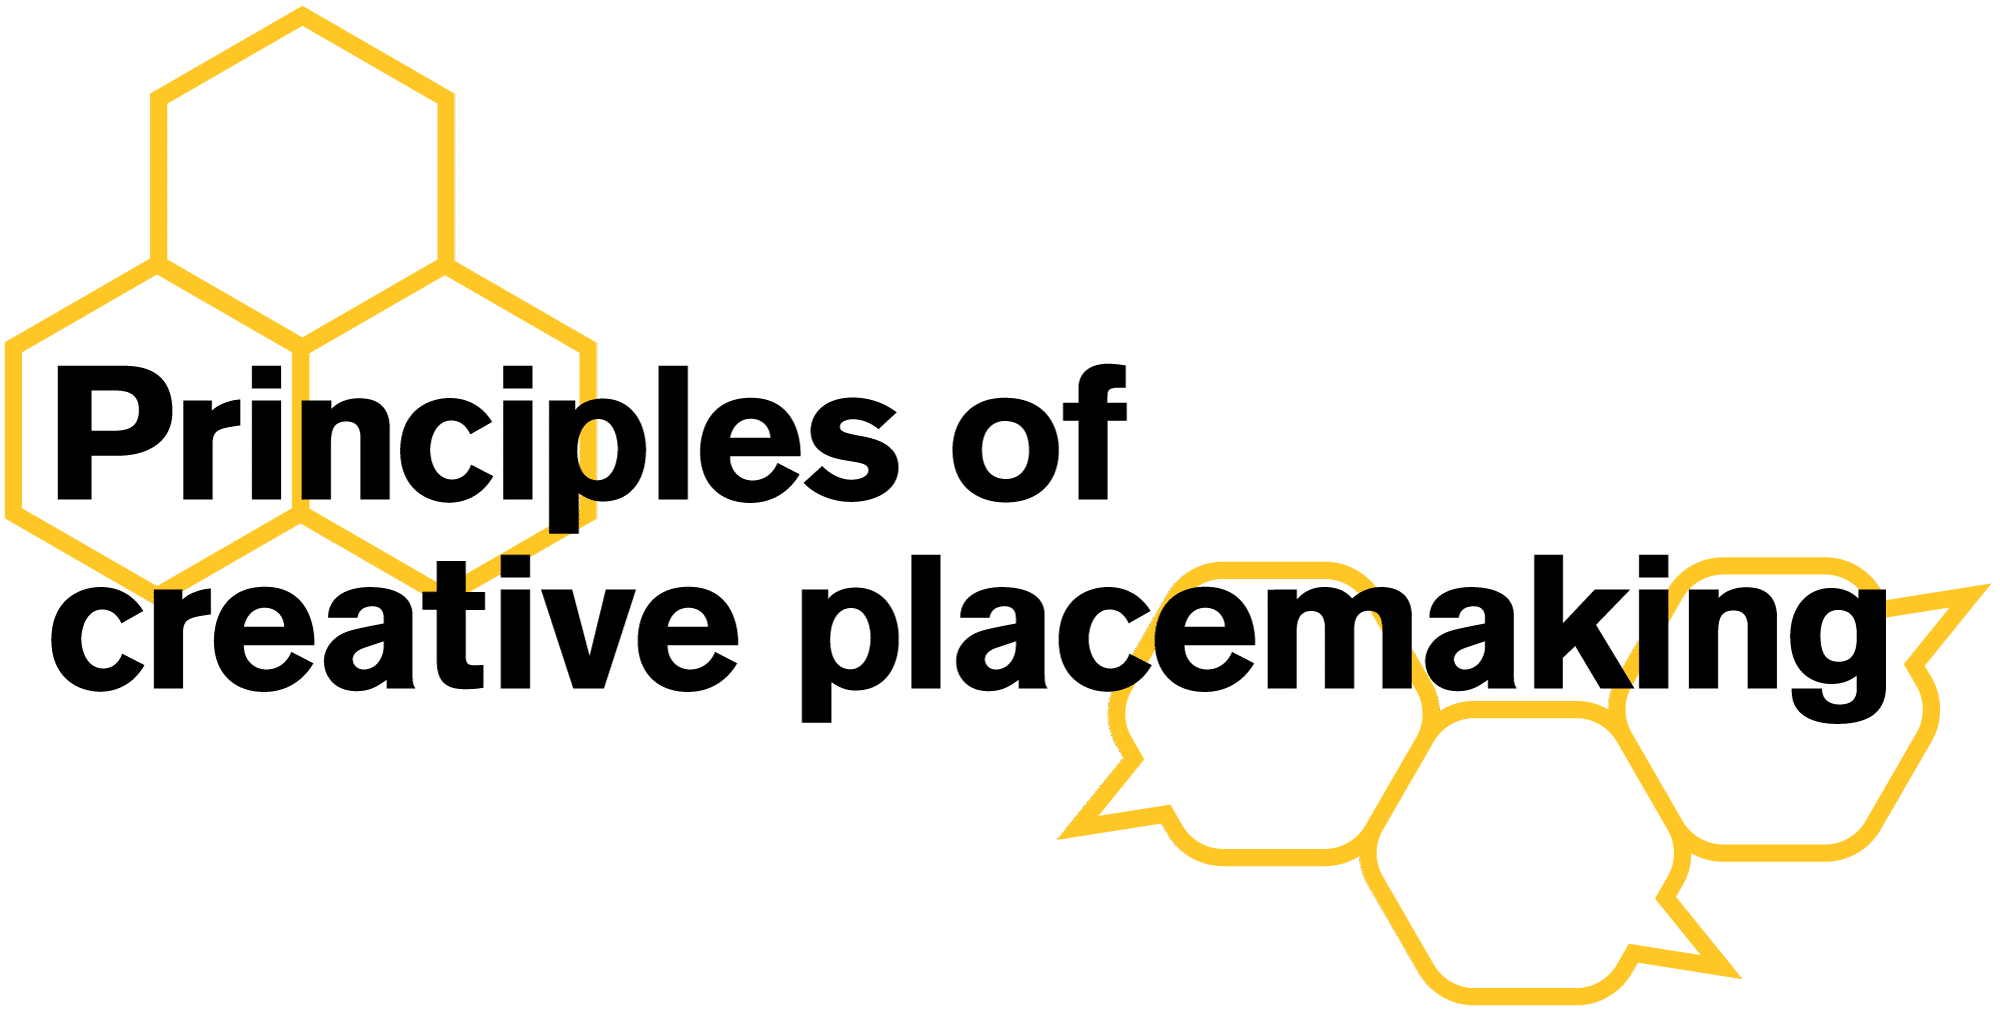 Principles of creative placemaking (text)